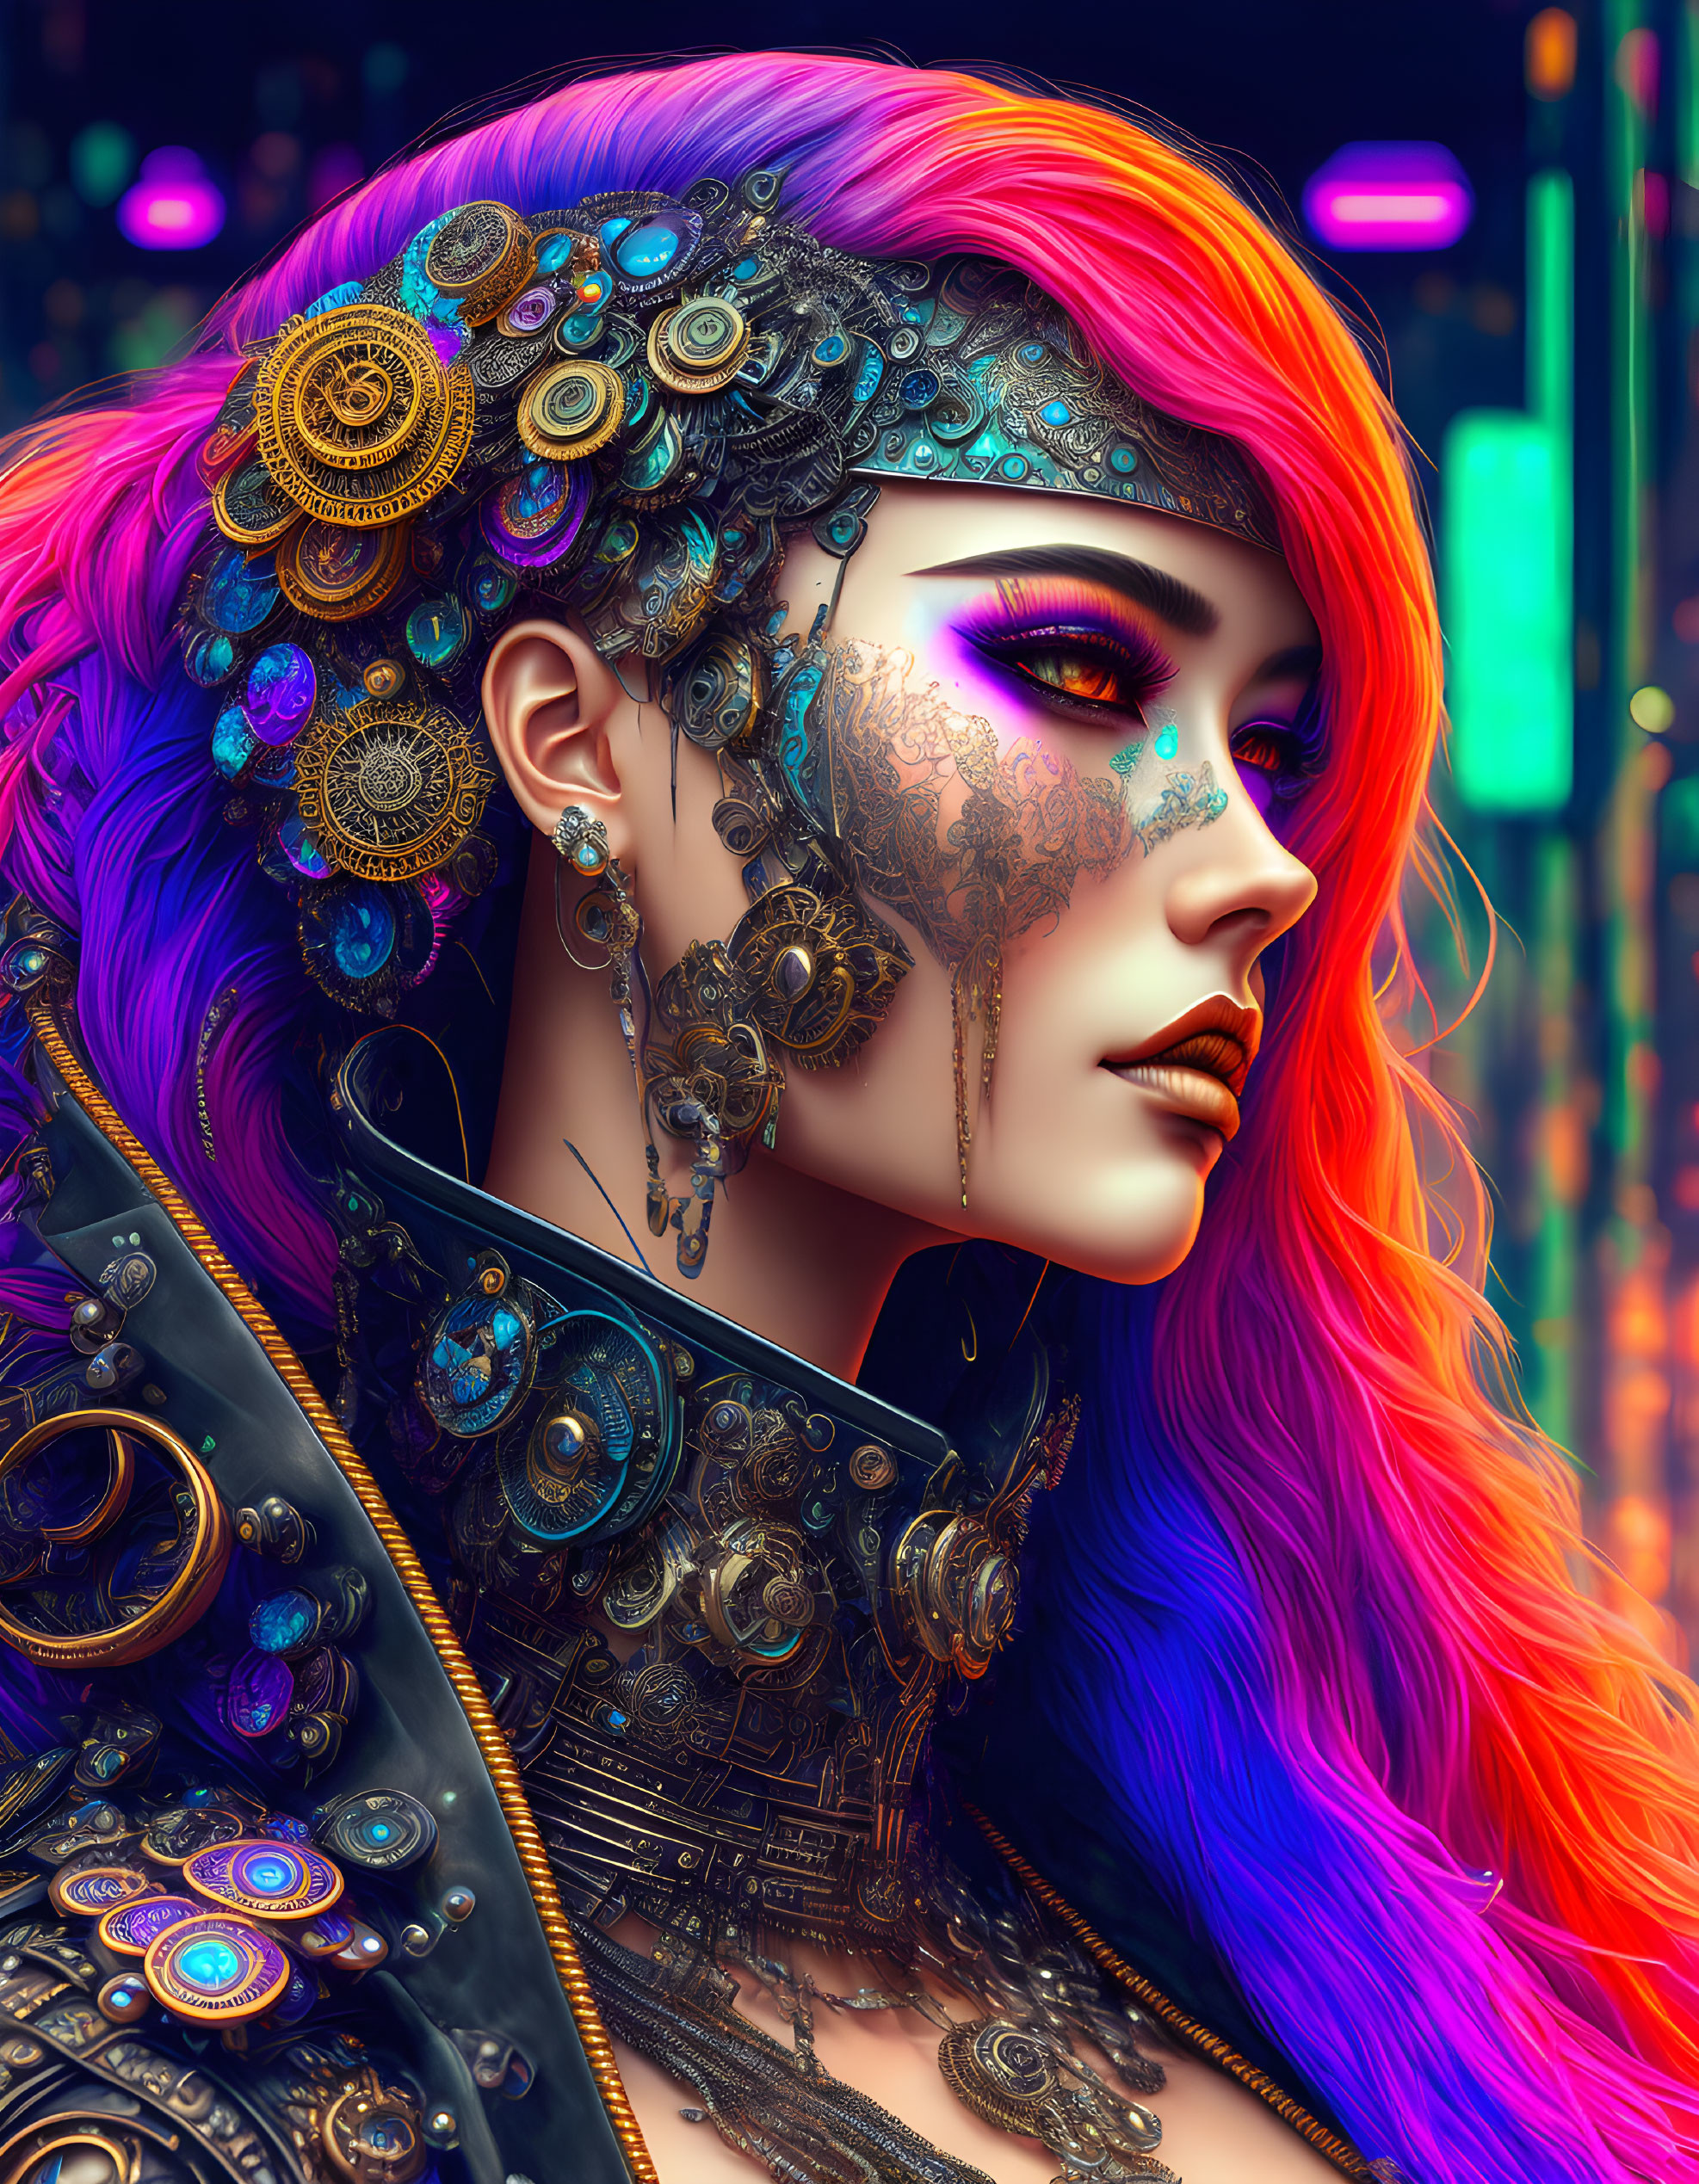 Colorful portrait of a woman with rainbow hair and steampunk headgear.